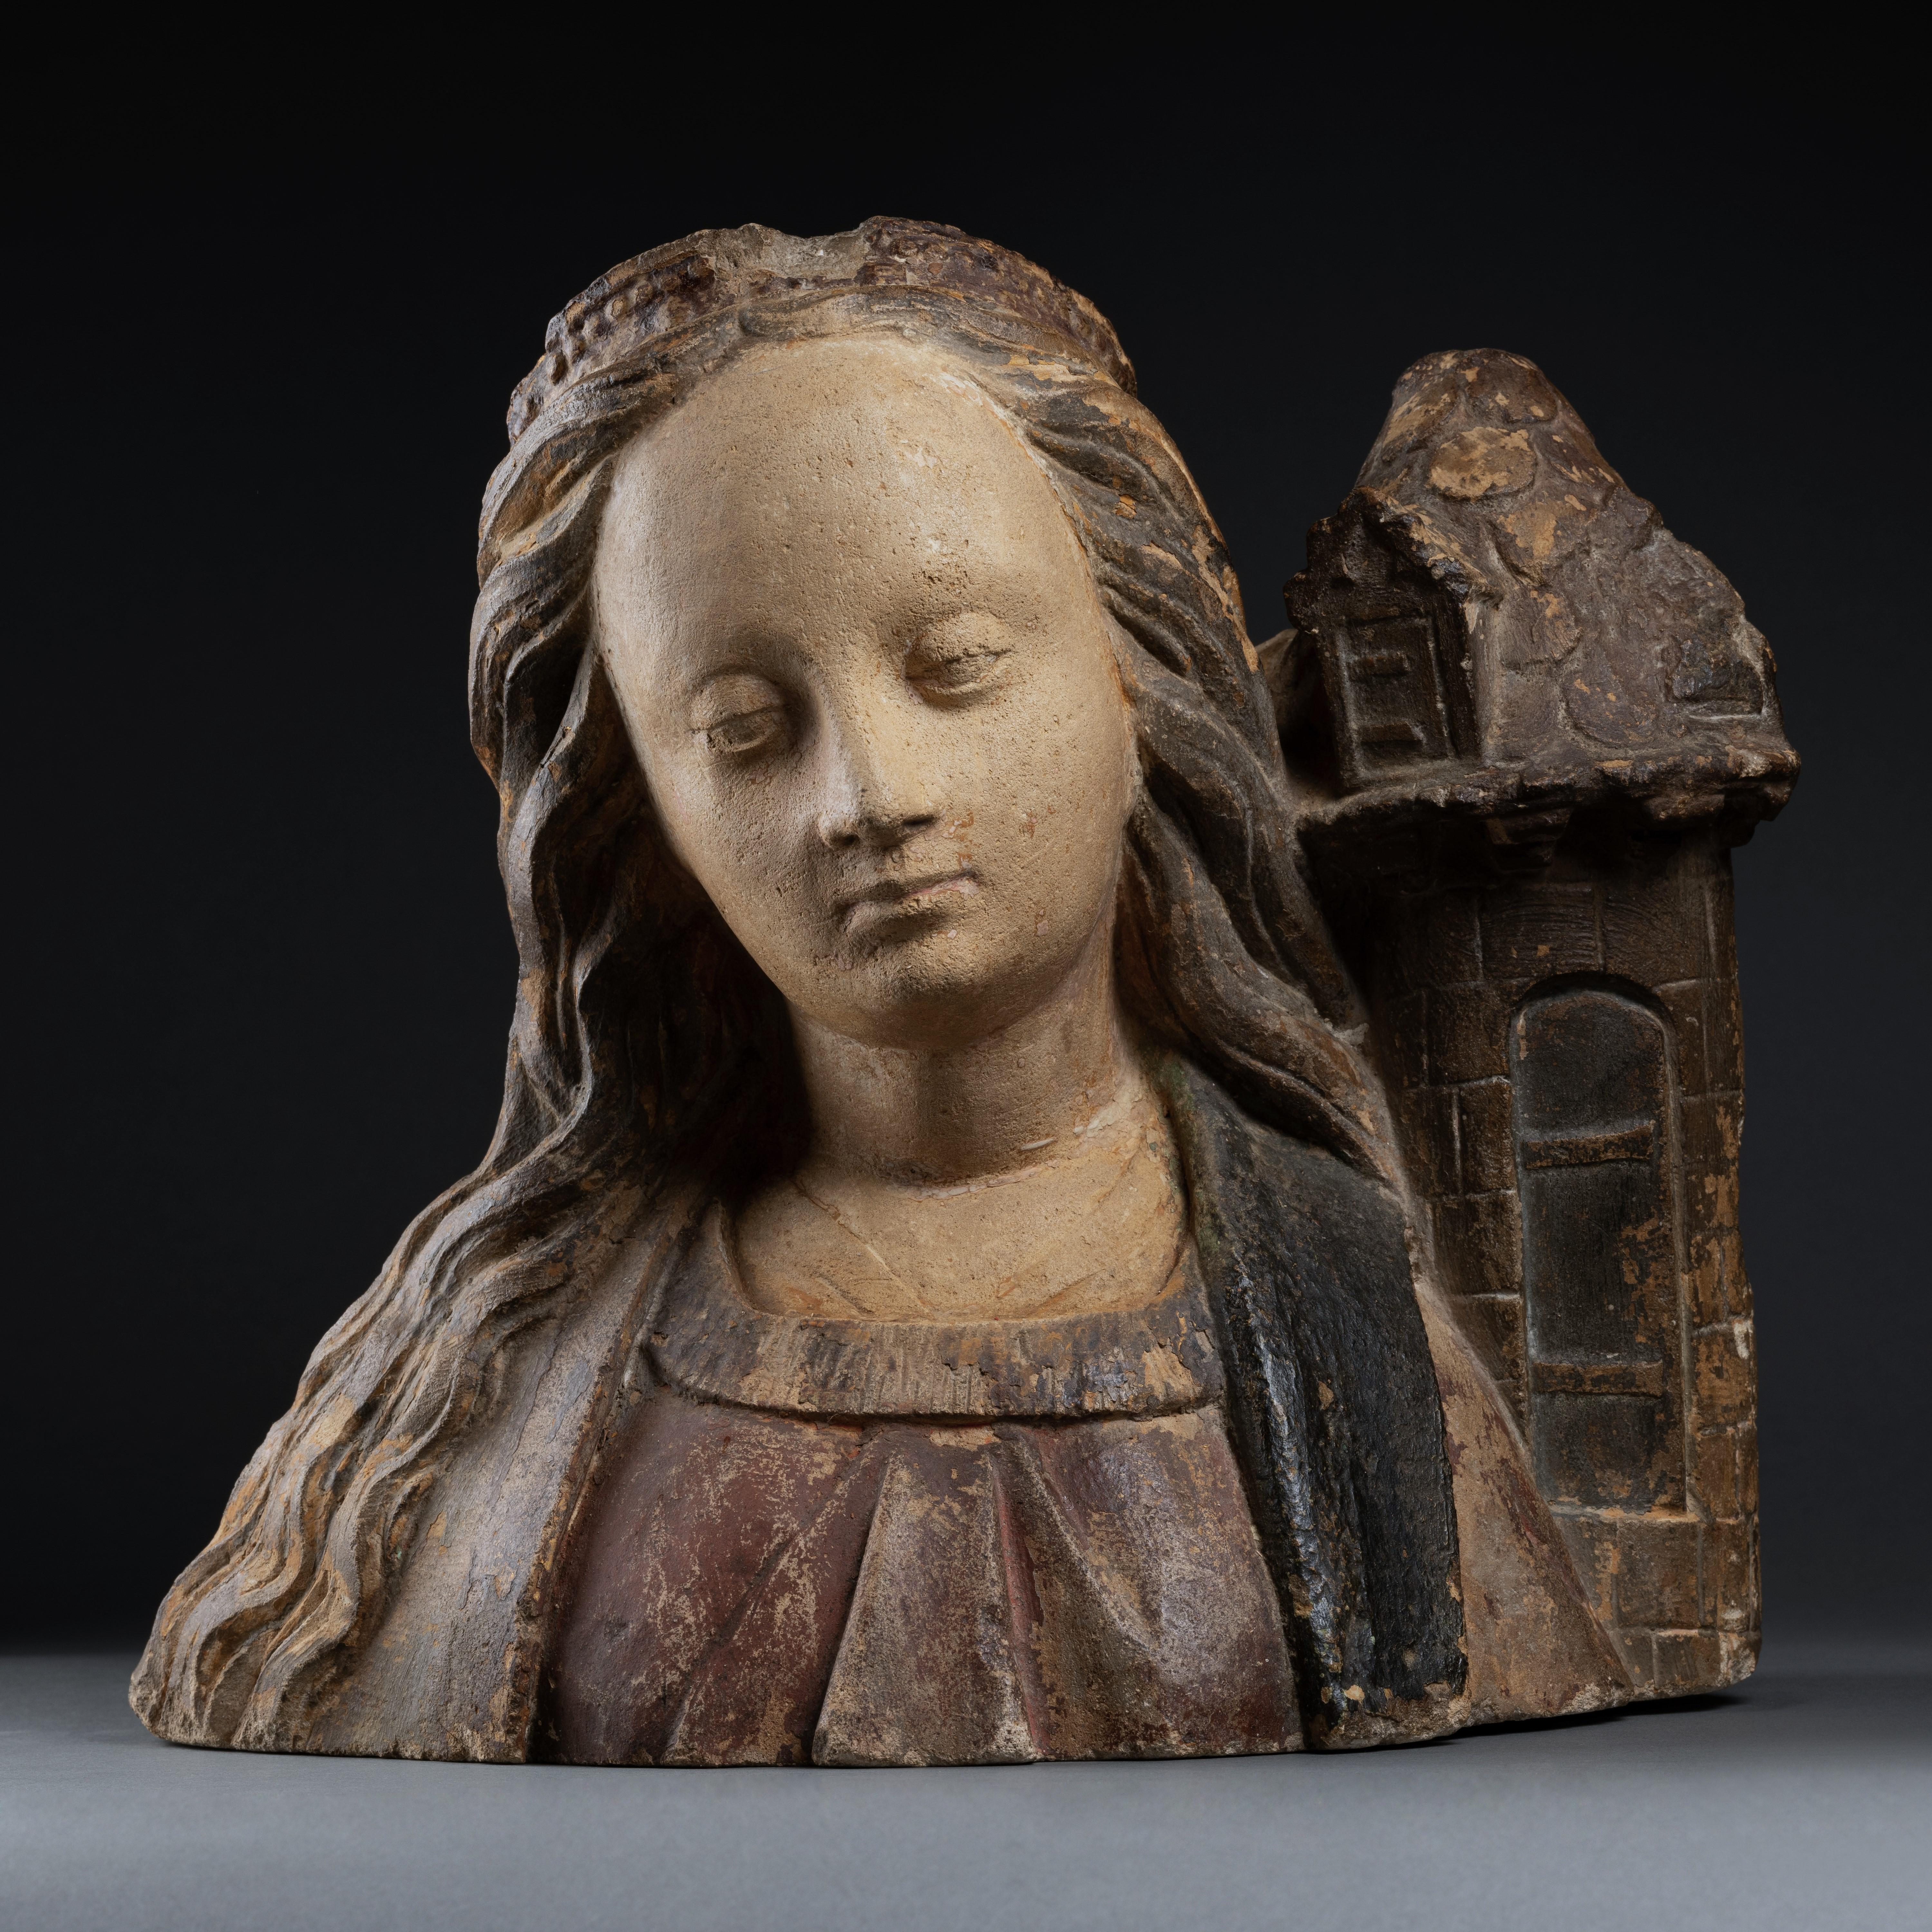 Bust of Saint Barbara 
School of Troyes, Champagne
Circa 1520-1530
Partially polychrome limestone
h. 13 in., w. 12.6 in., d. 9.84 in.

This remarkable stone sculpture belongs to the traditional Champagne repertoire from the first third of the 16th